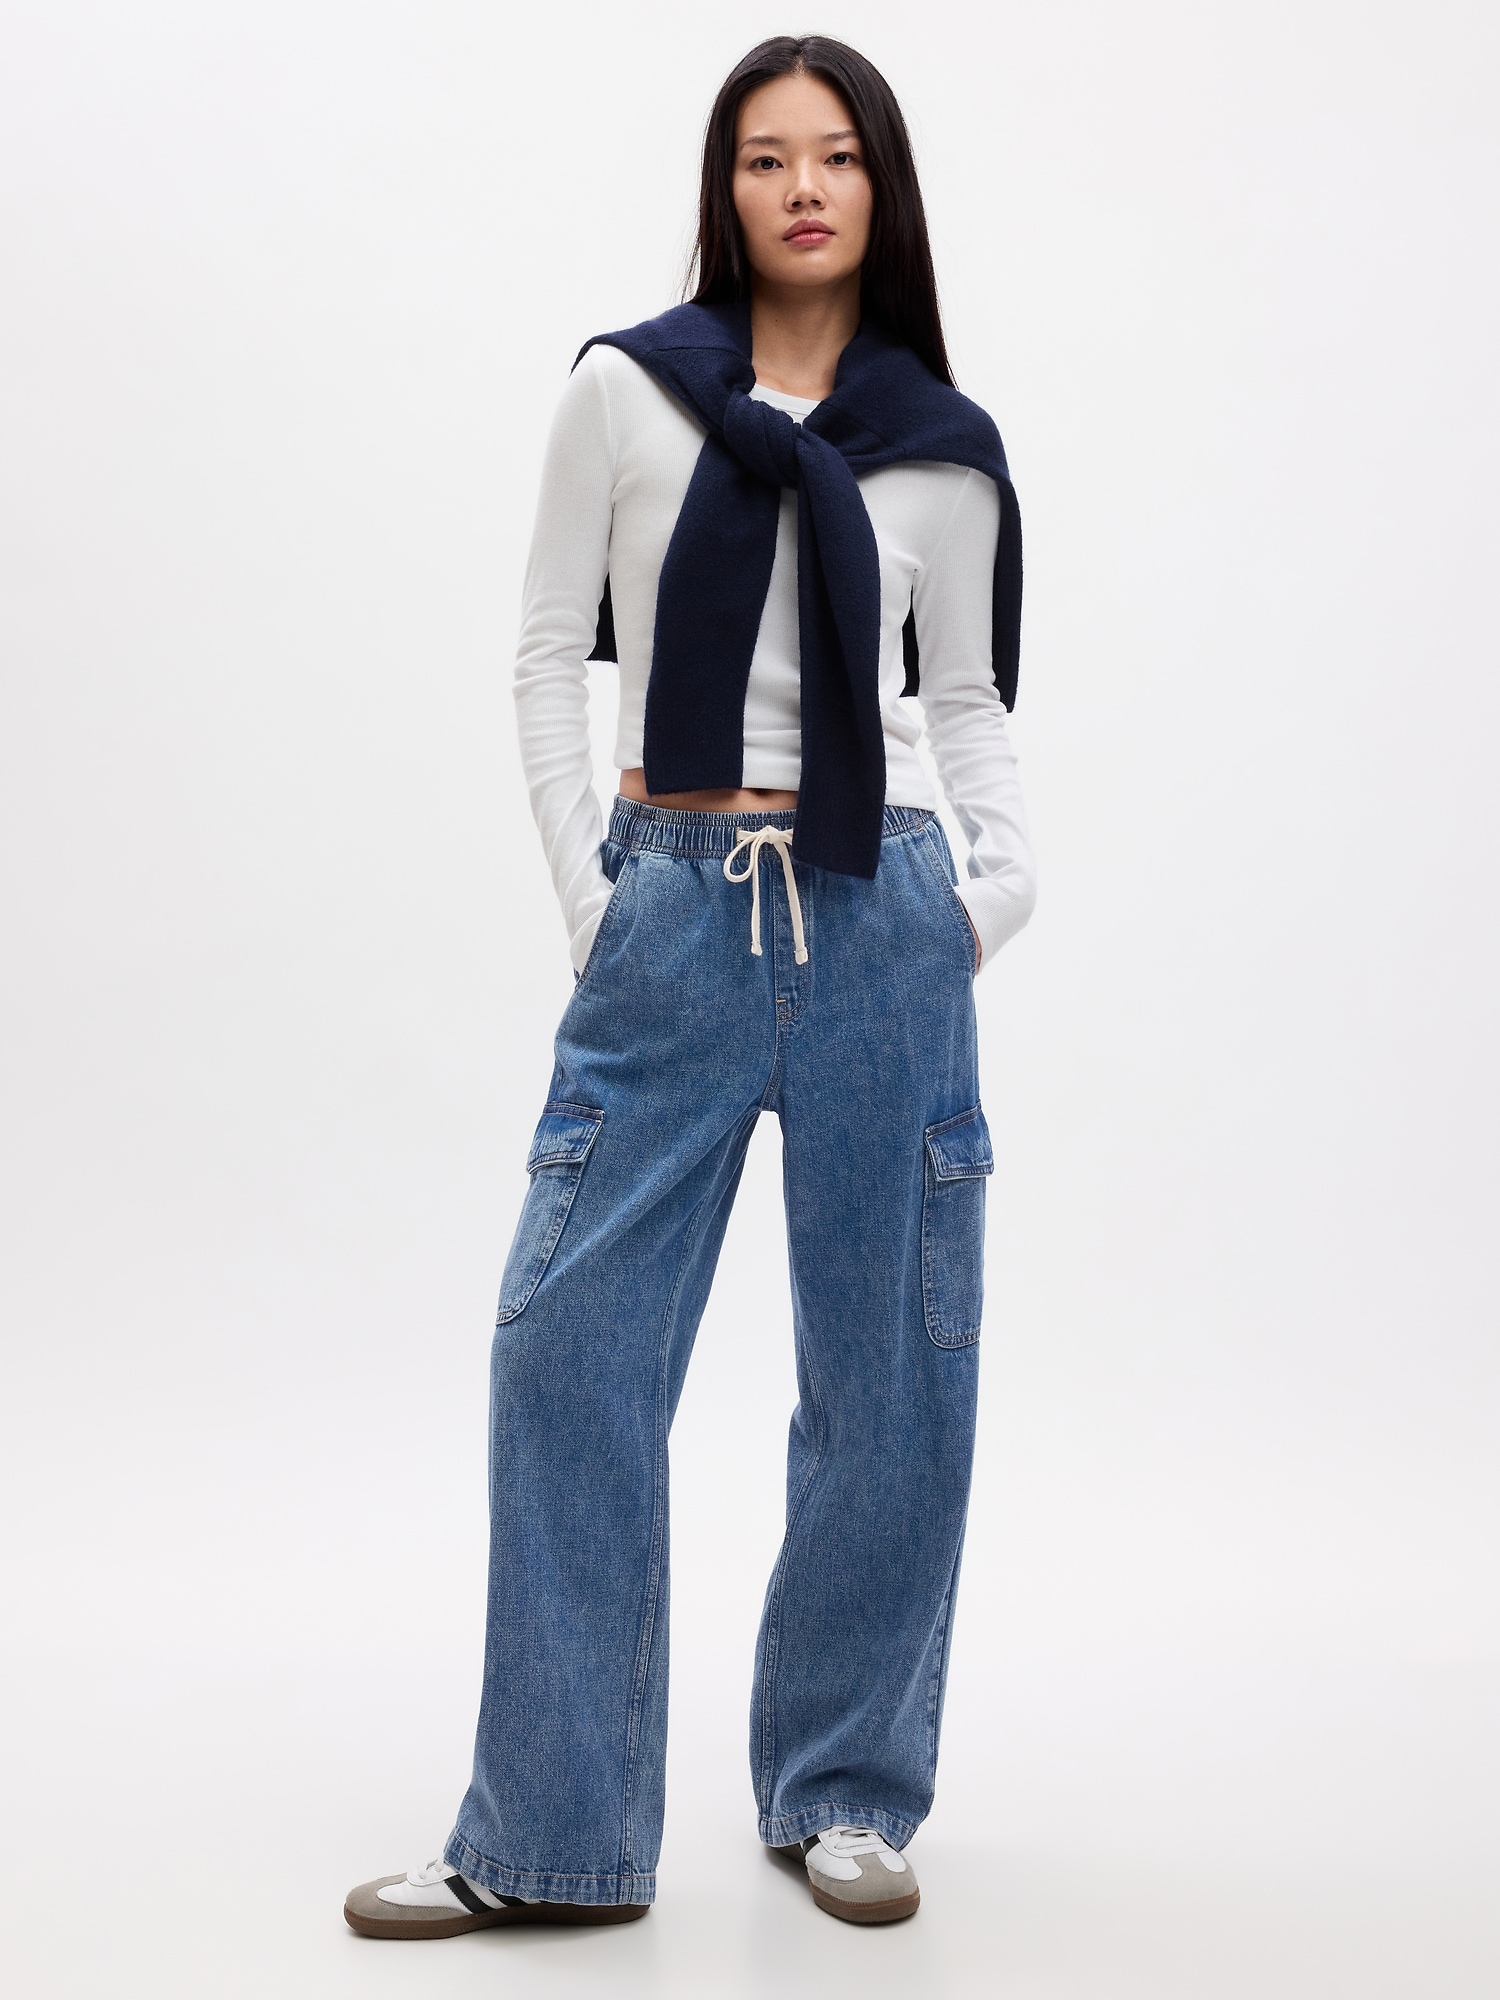 uSecee Jeans for Women Pull On Denim Pants Casual Elastic Waist